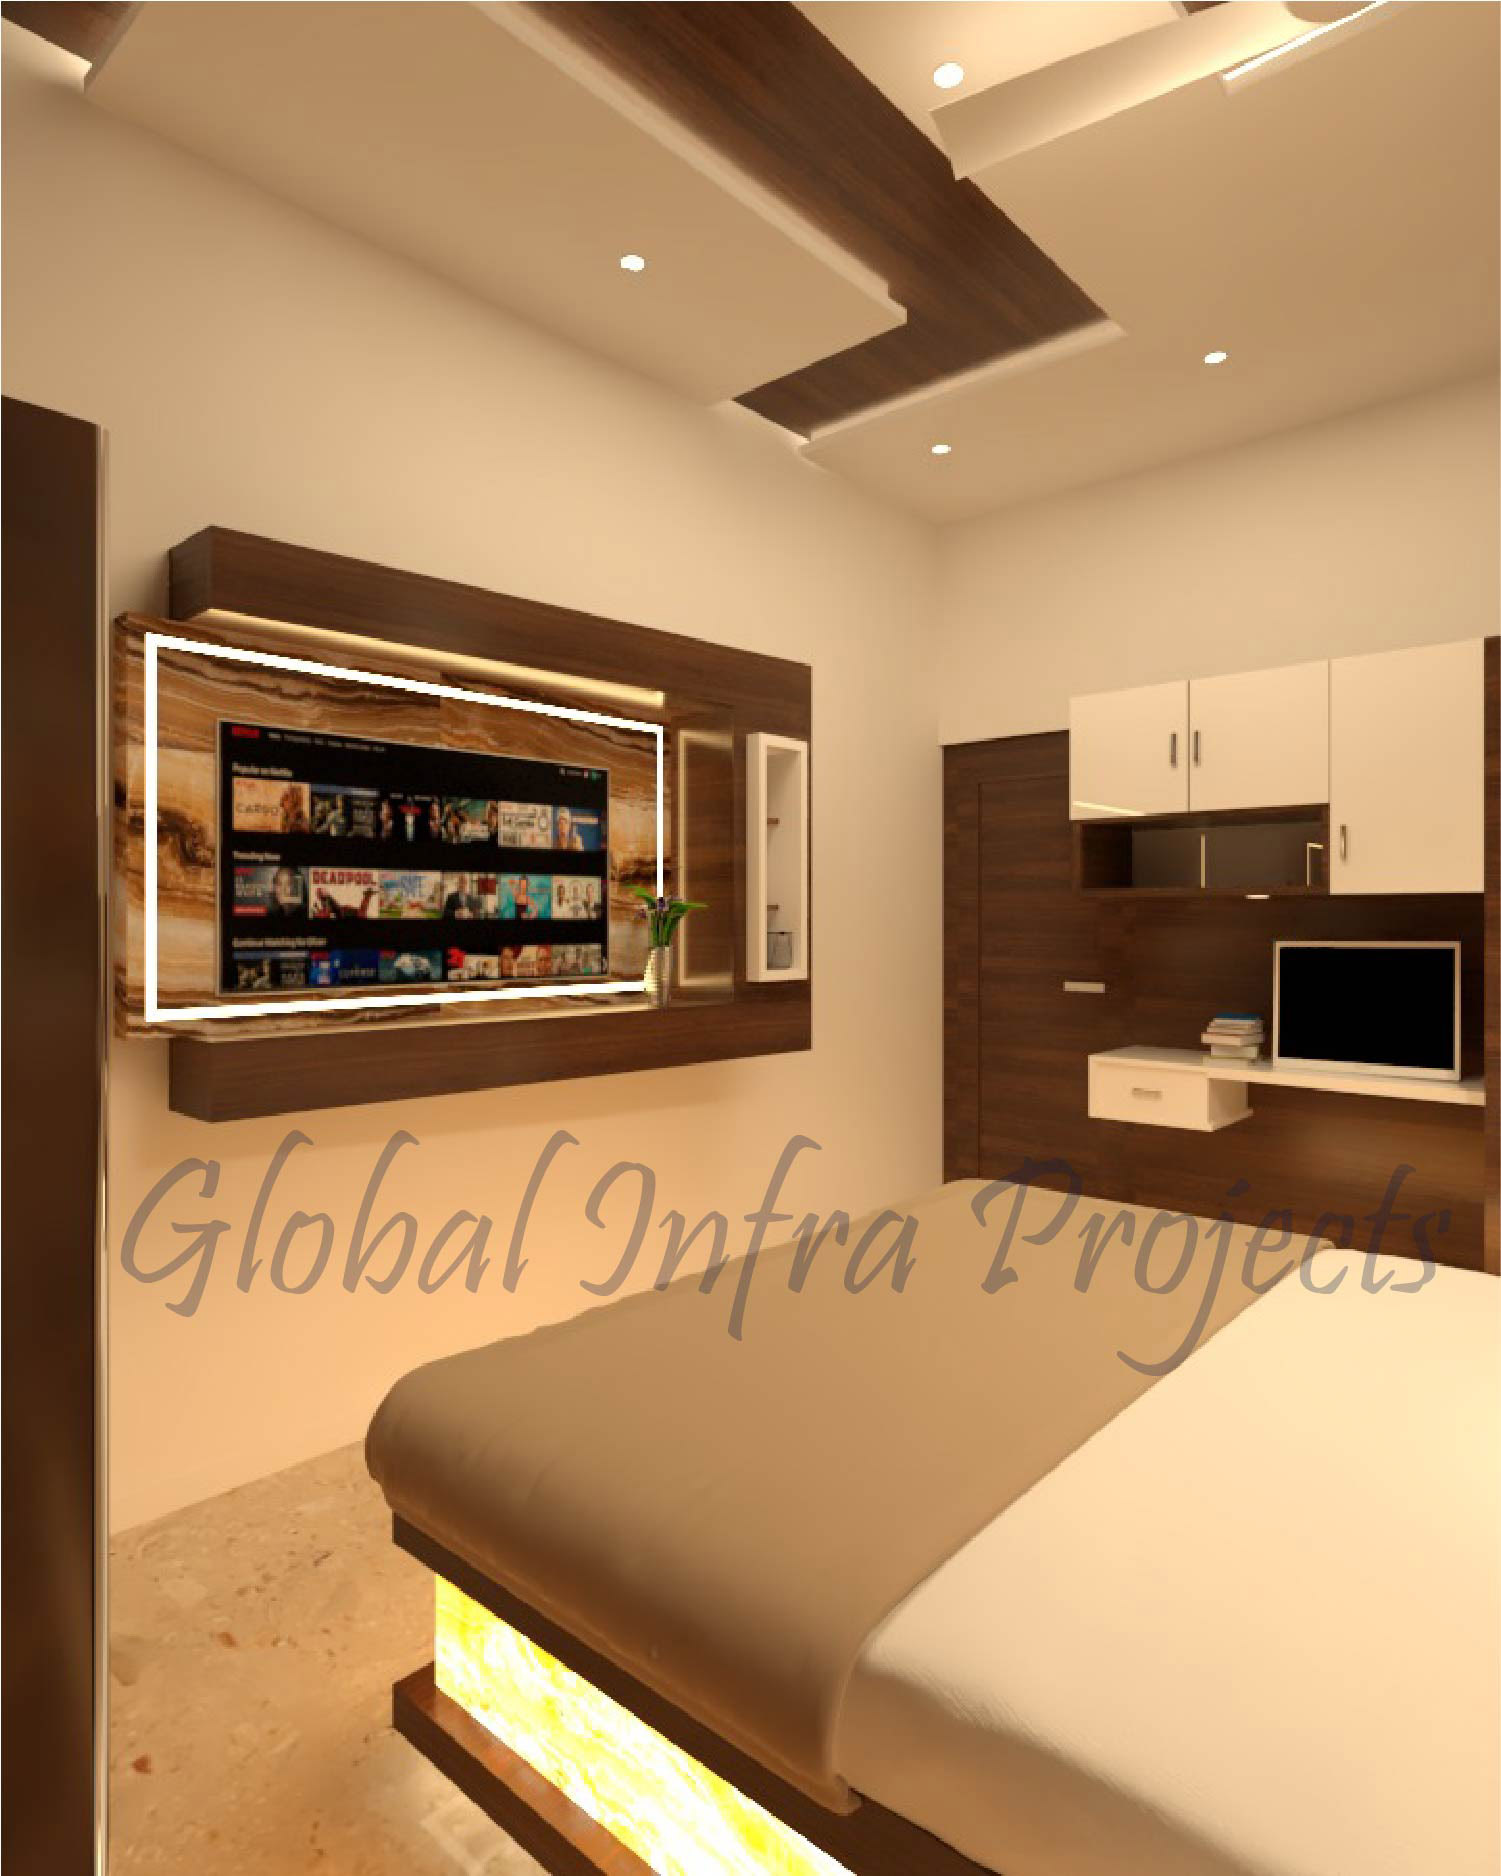 global-infra-project-interior